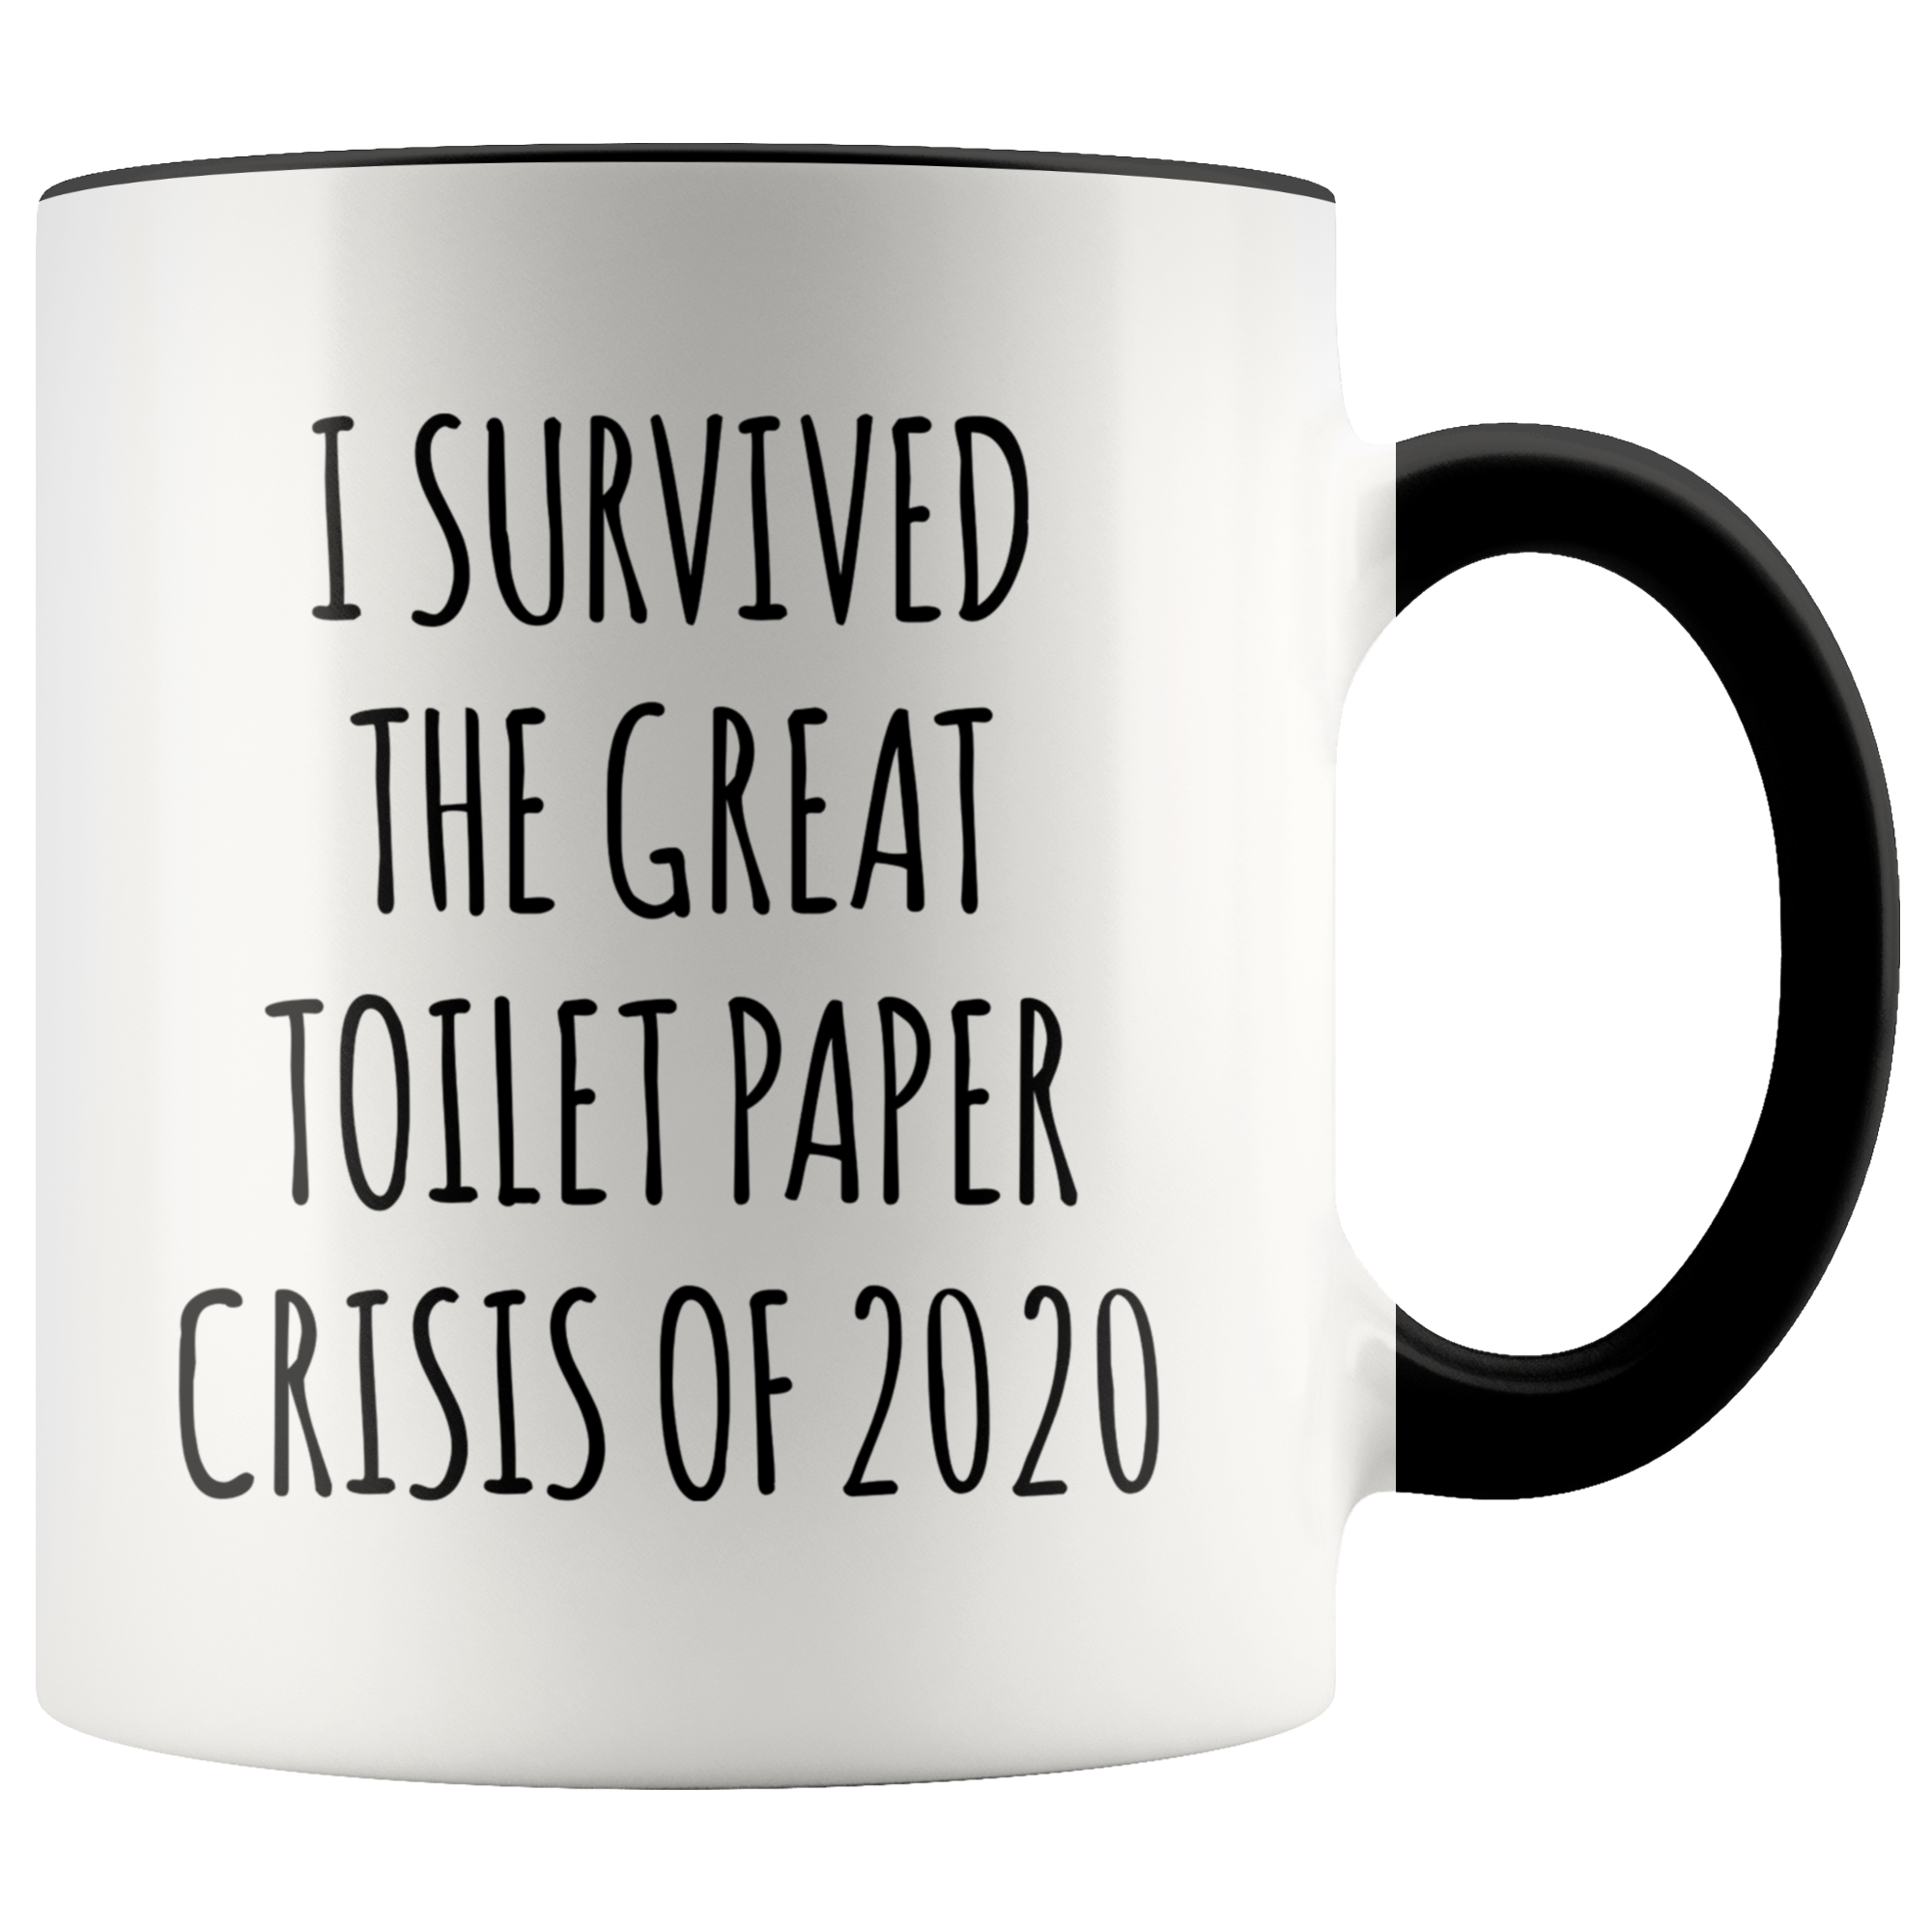 I Survived the Great Toilet Paper Crisis of 2020 Mug Funny Coffee Cup TP Shortage Humor TP Outage Gag Gift for Coworker Gifts